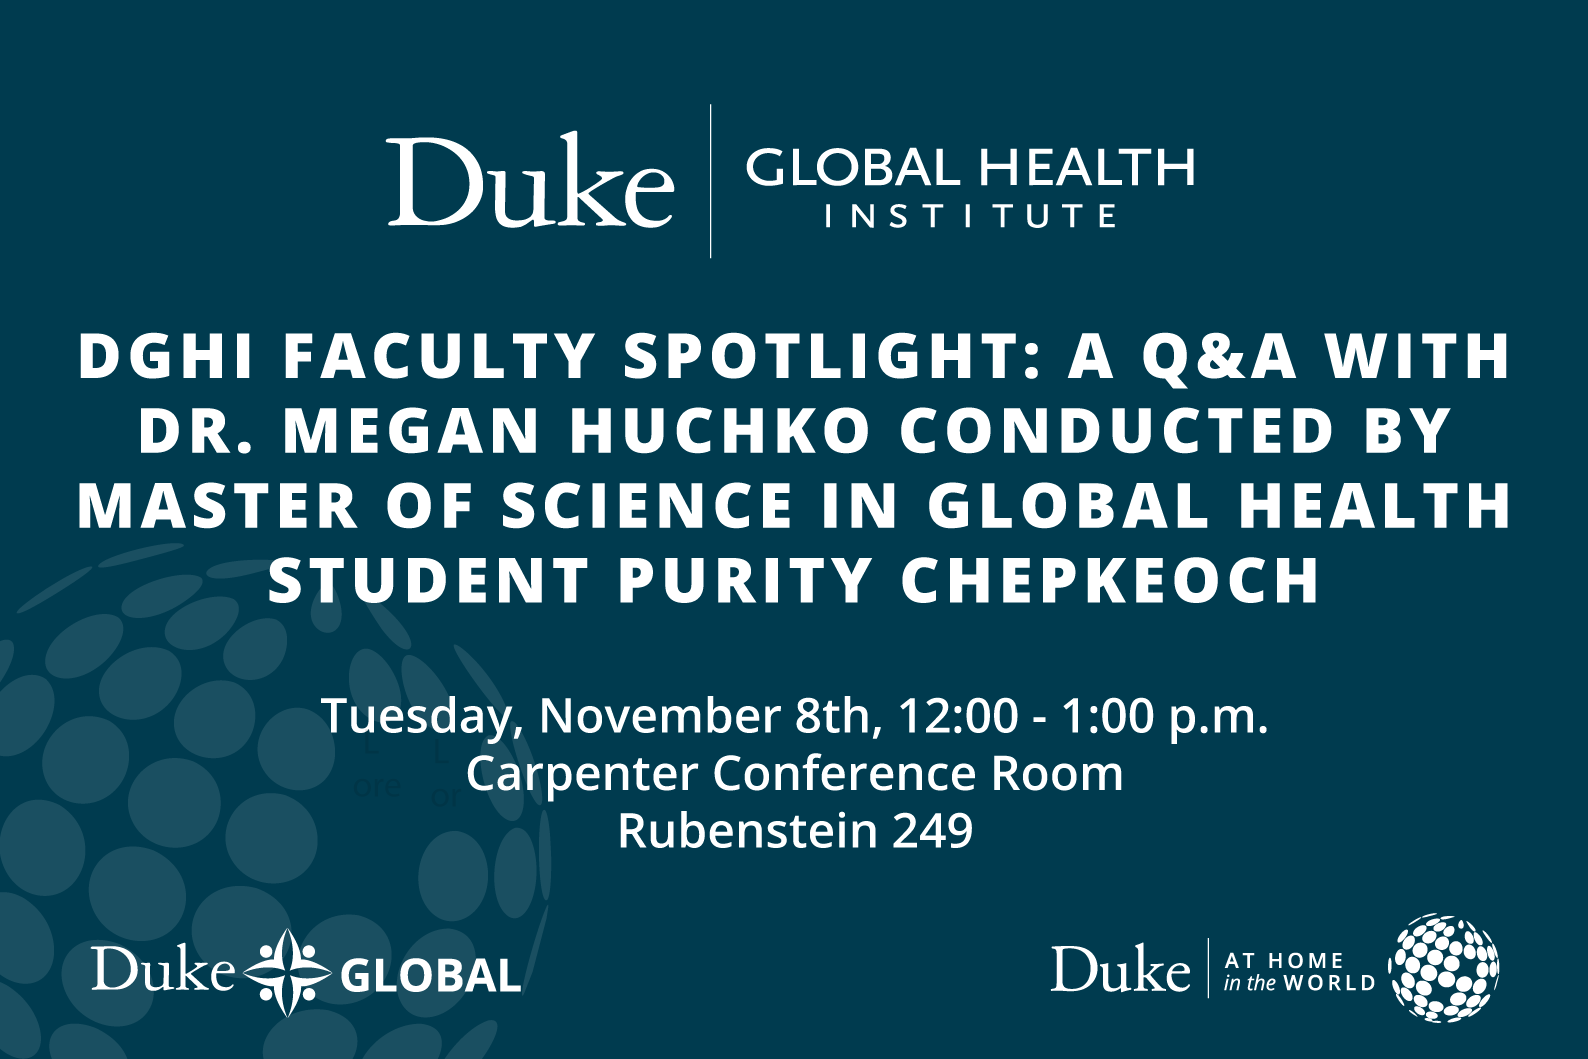 DGHI Faculty Spotlight: A Q&amp;amp;A with Dr. Megan Huchko conducted by Master of Science in Global Health student Purity Chepkeoch Tuesday, November 8th, 12:00 - 1:00 p.m. Carpenter Conference Room (Rubenstein 249)